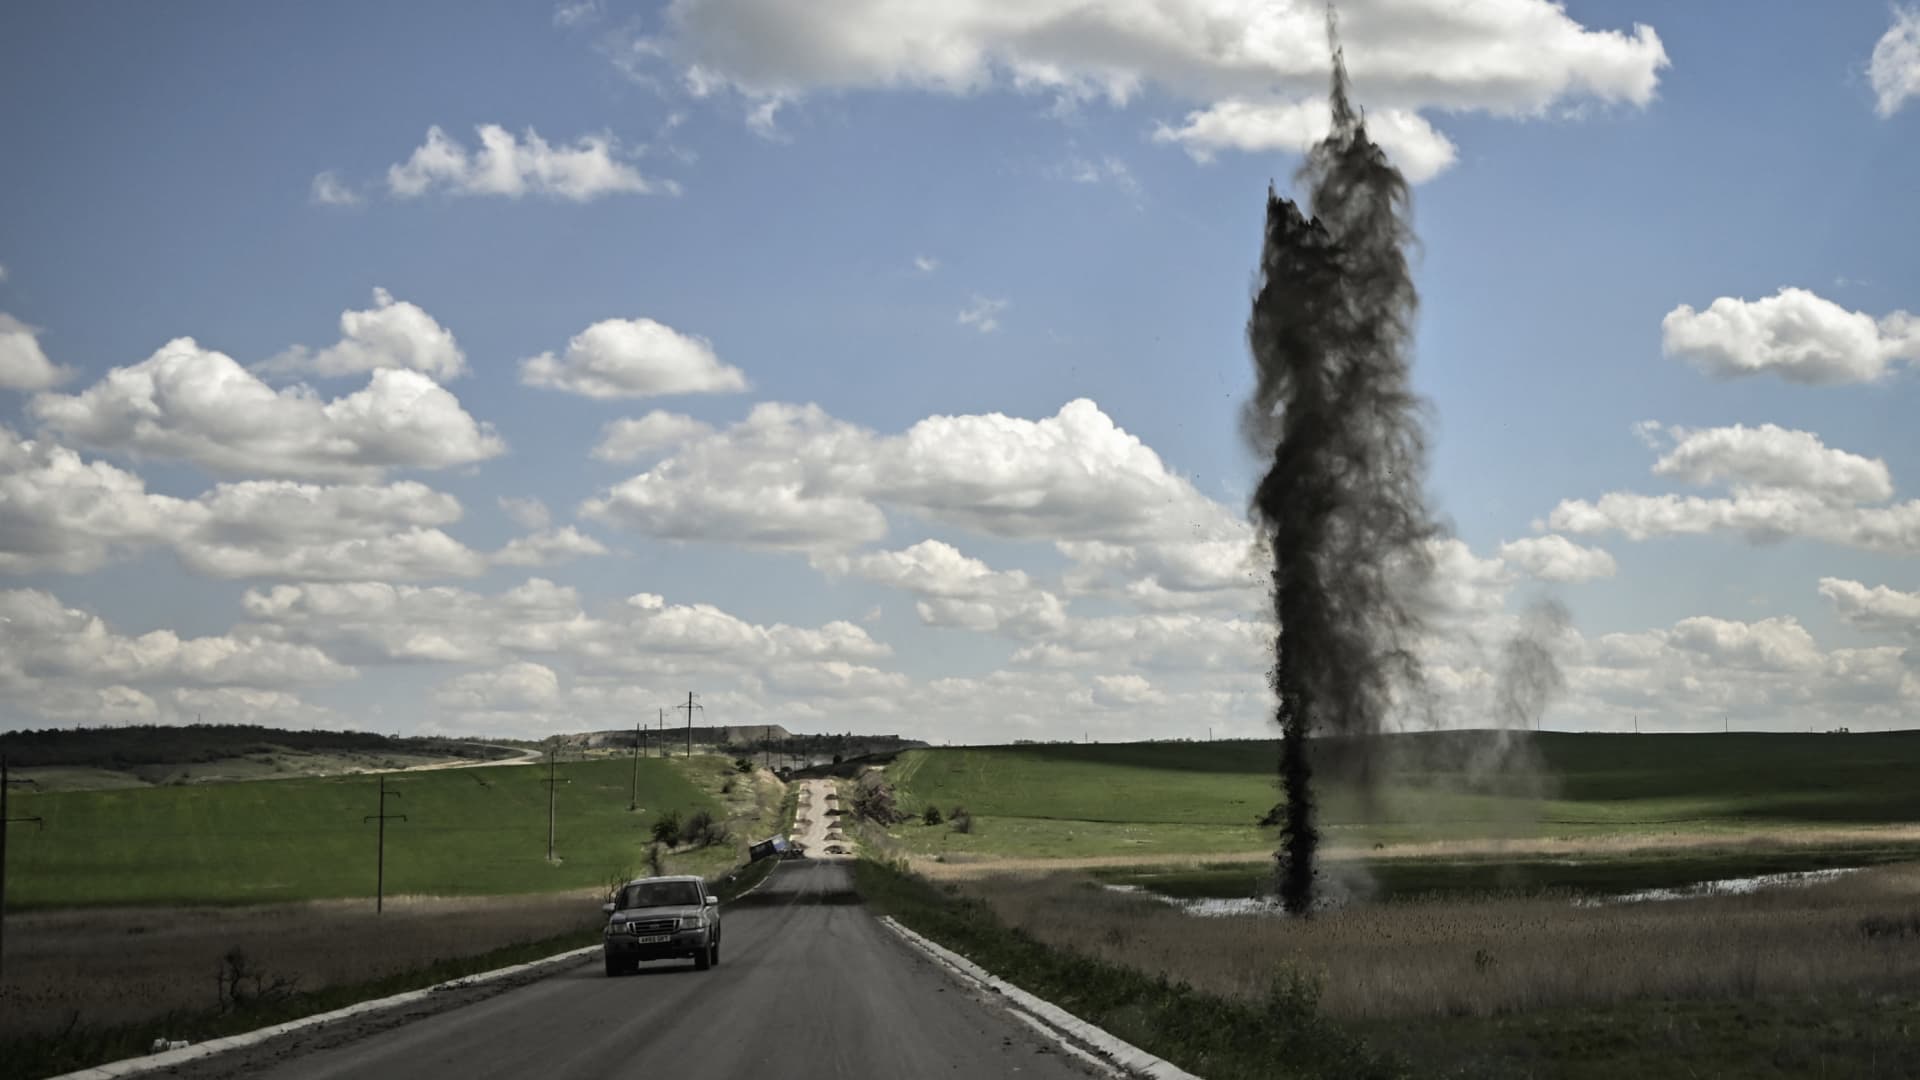 A mortar explodes next to the road leading to the city of Lysychansk in the eastern Ukranian region of Donbas, on May 23, 2022, amid Russian invasion of Ukraine.